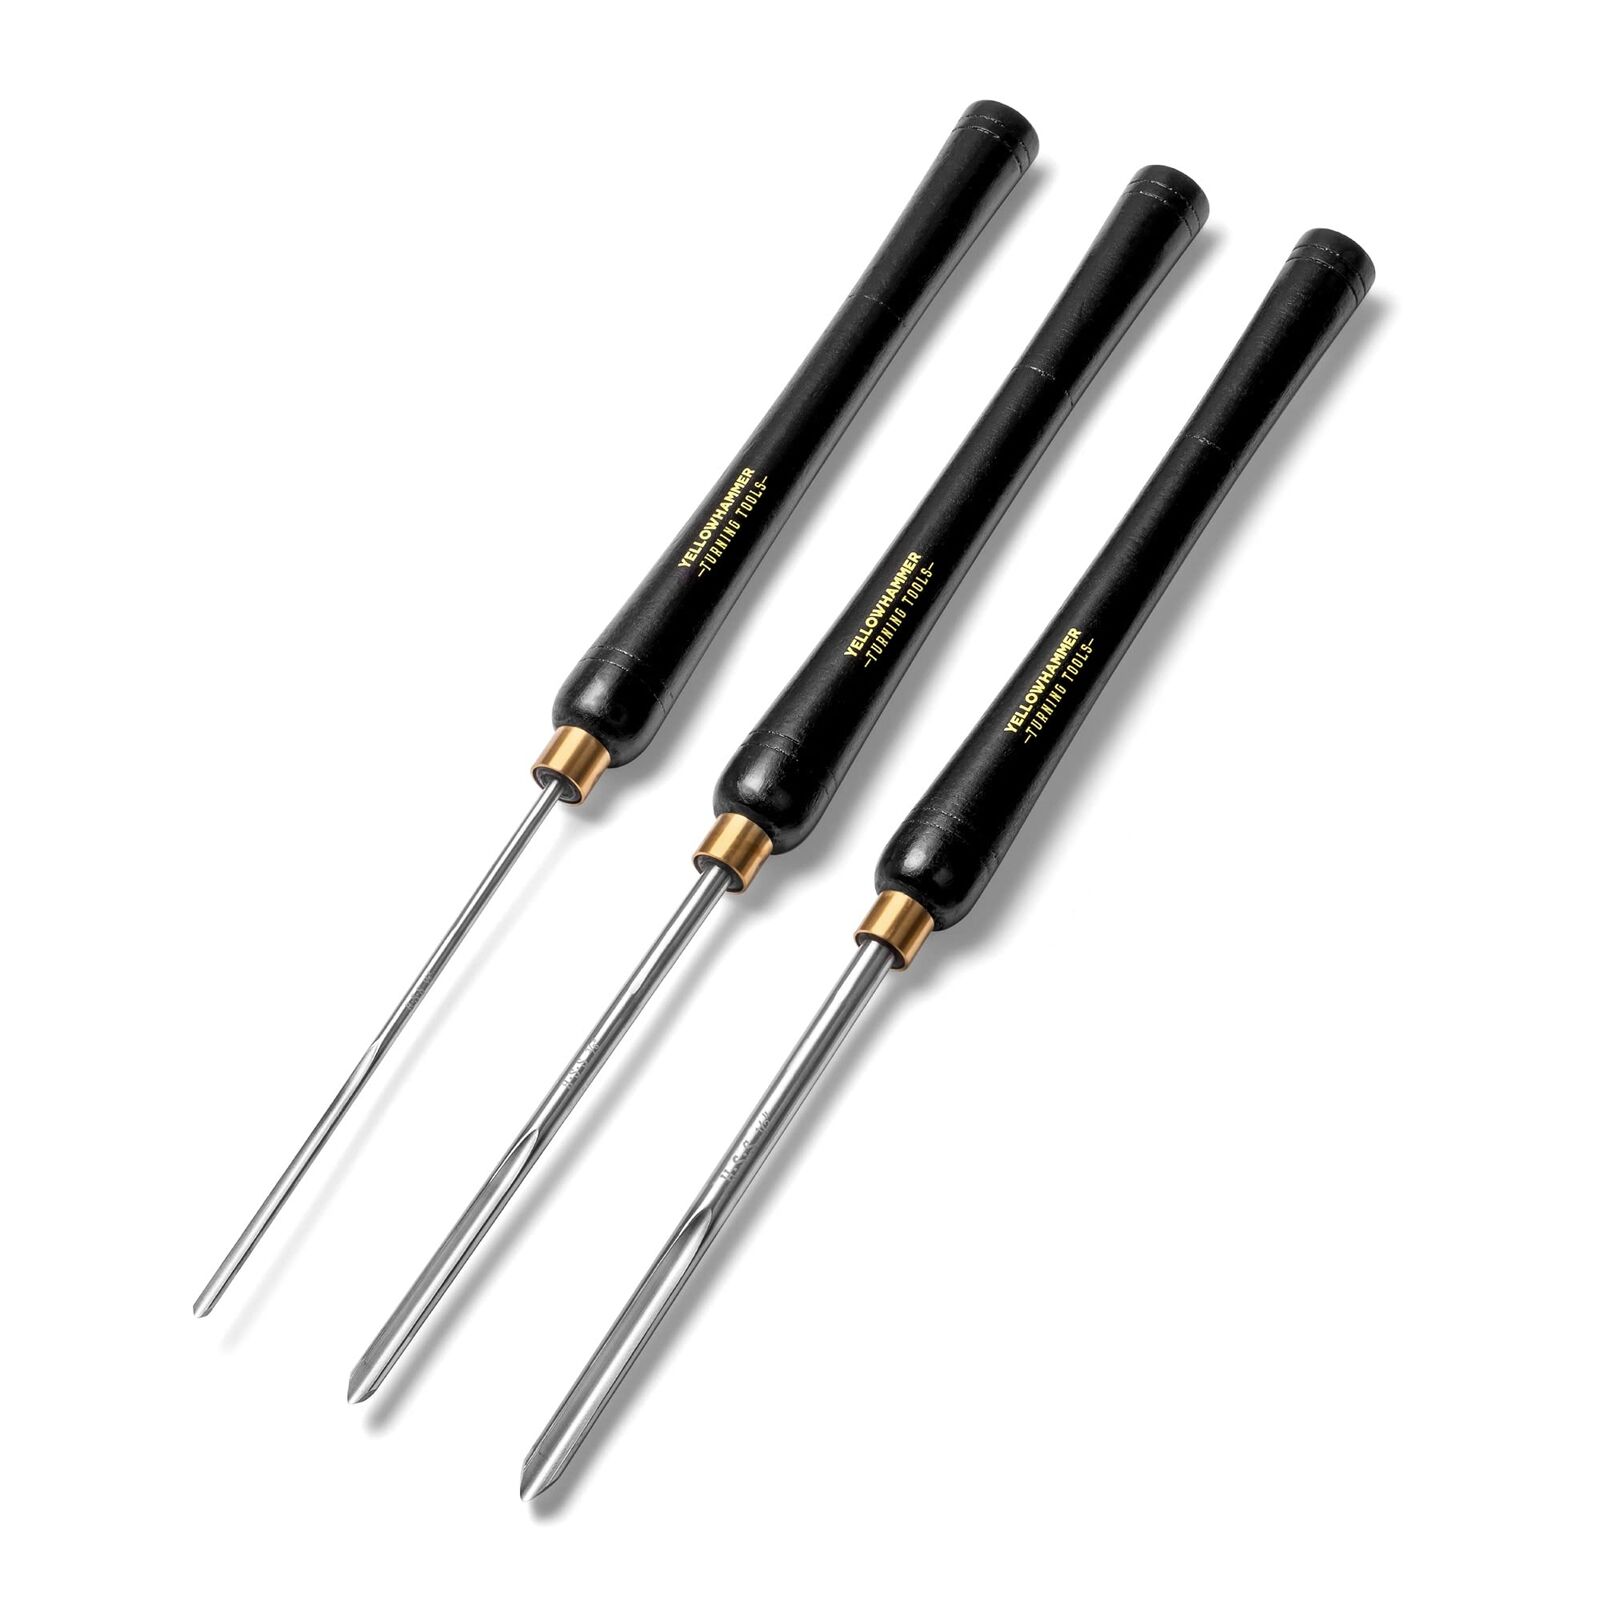 Yellowhammer Turning Tools Essentials 3 Piece Bowl Gouge Set Includes 1/4 Flu...